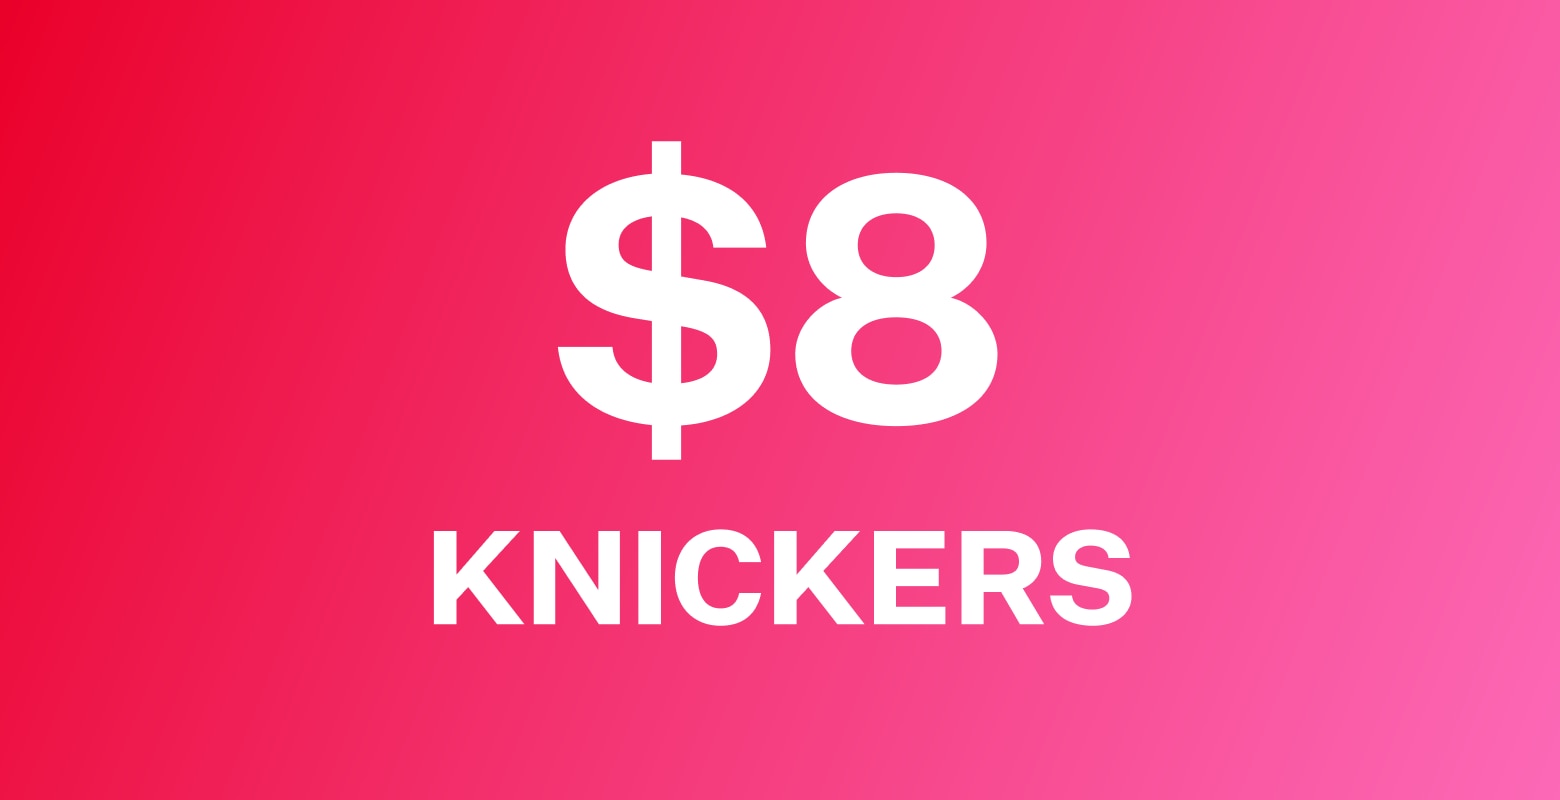 Knickers from $5